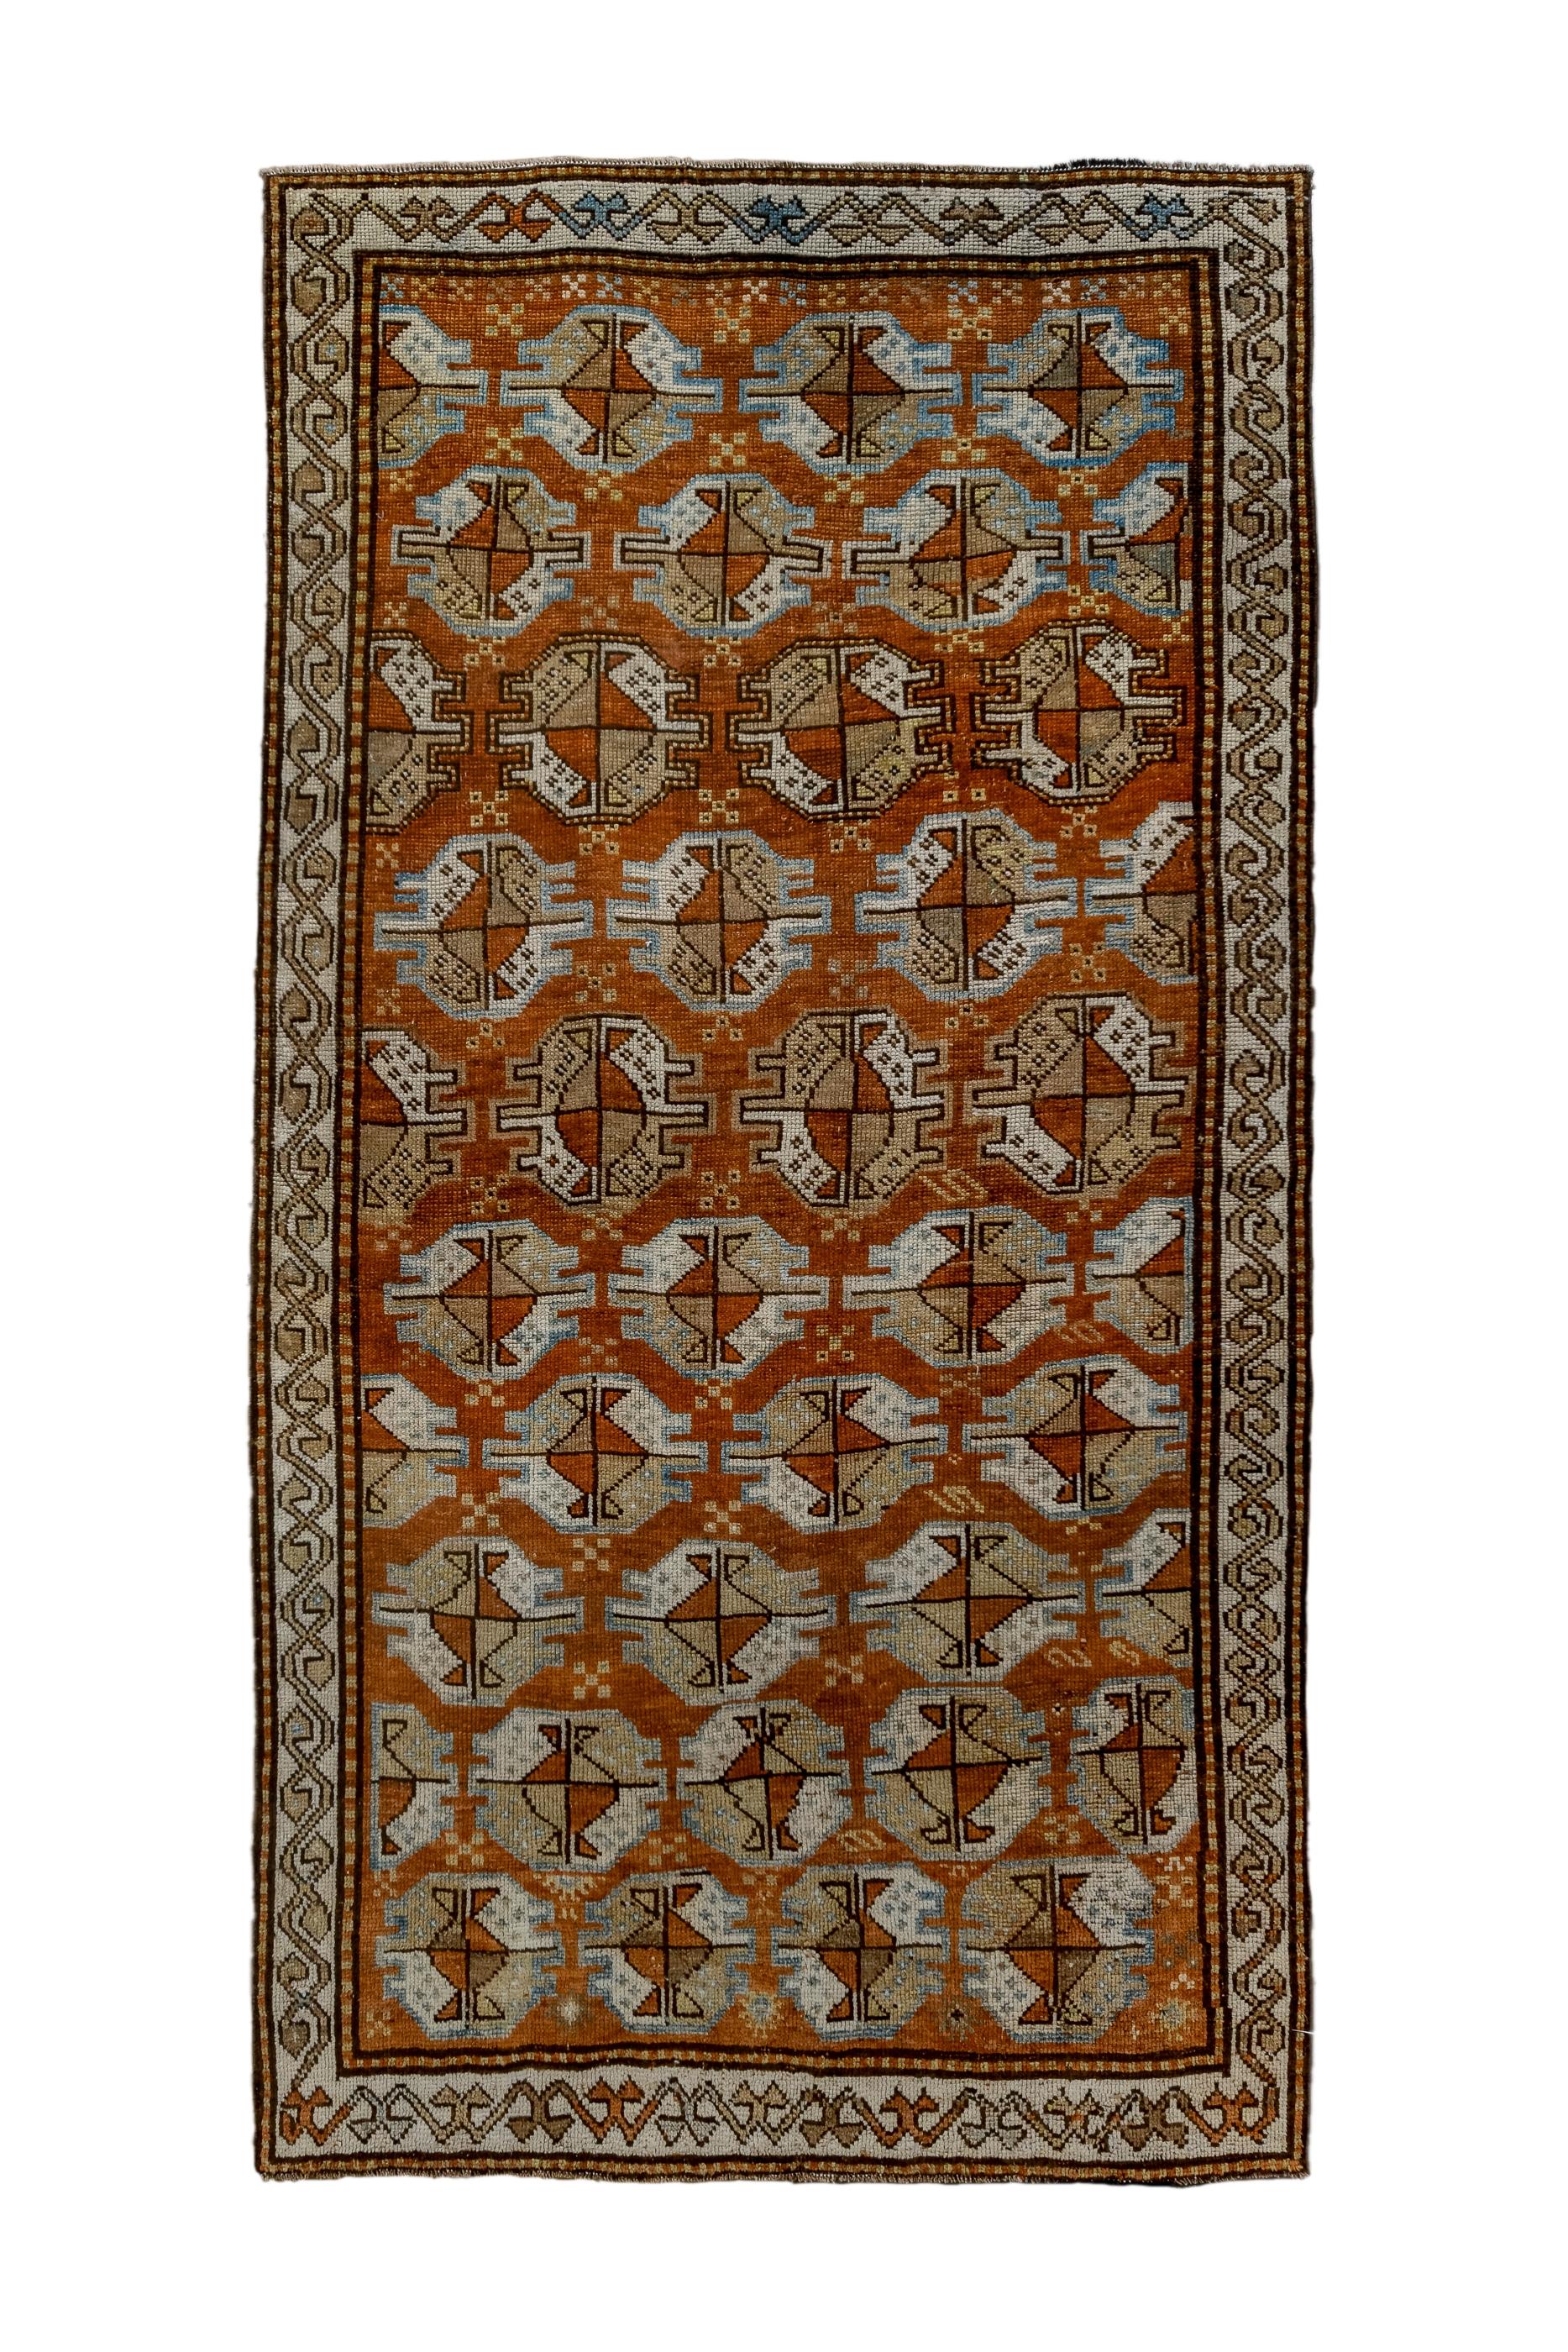 Kurds were settled in the early 17th century in Khorassan and they adopted certain Turkmen design elements, as here shown in this antique piece with ten offset rows of Tekke or Yomud guls on a red ground. The guls are quartered in ecru and